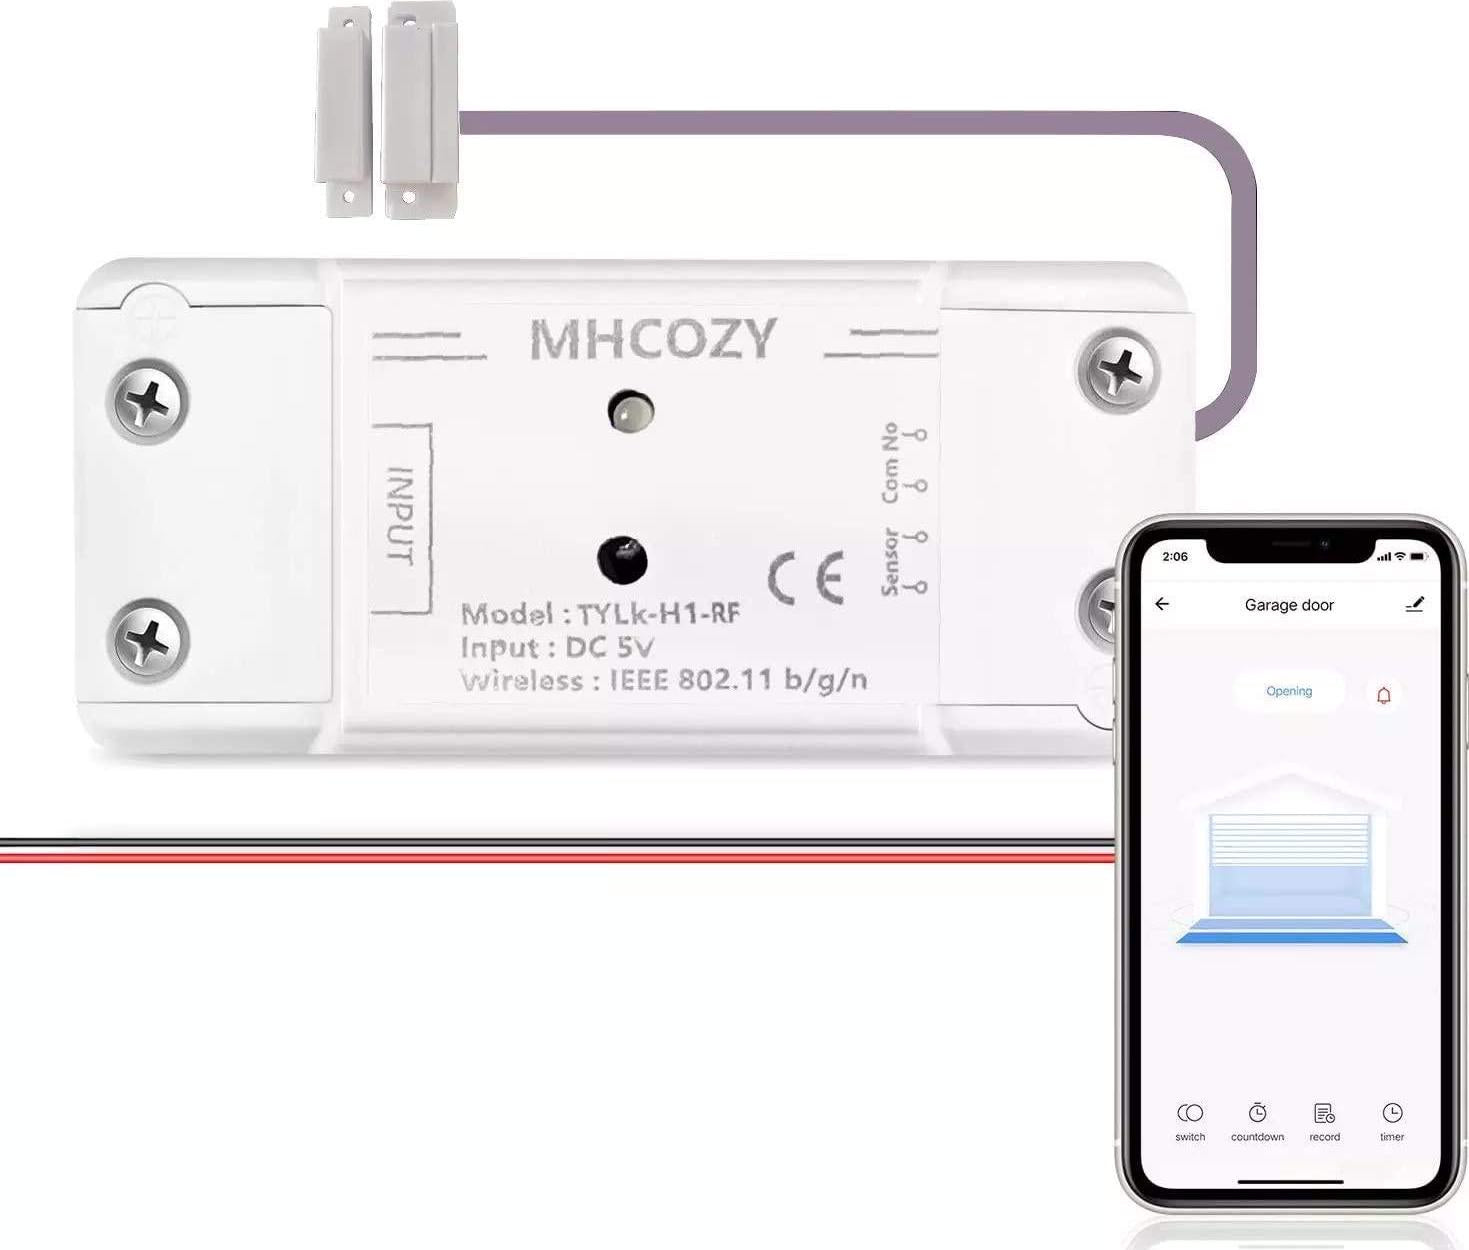 MHCOZY, MHCOZY WiFi Wireless Smart Switch Relay Module for Smart Home 5V/12V WiFi Momentary and Self-Locking Relay,Be Applied to Access Control, Add WiFi Remote to Garage Door (WiFi Garage Door Opener)